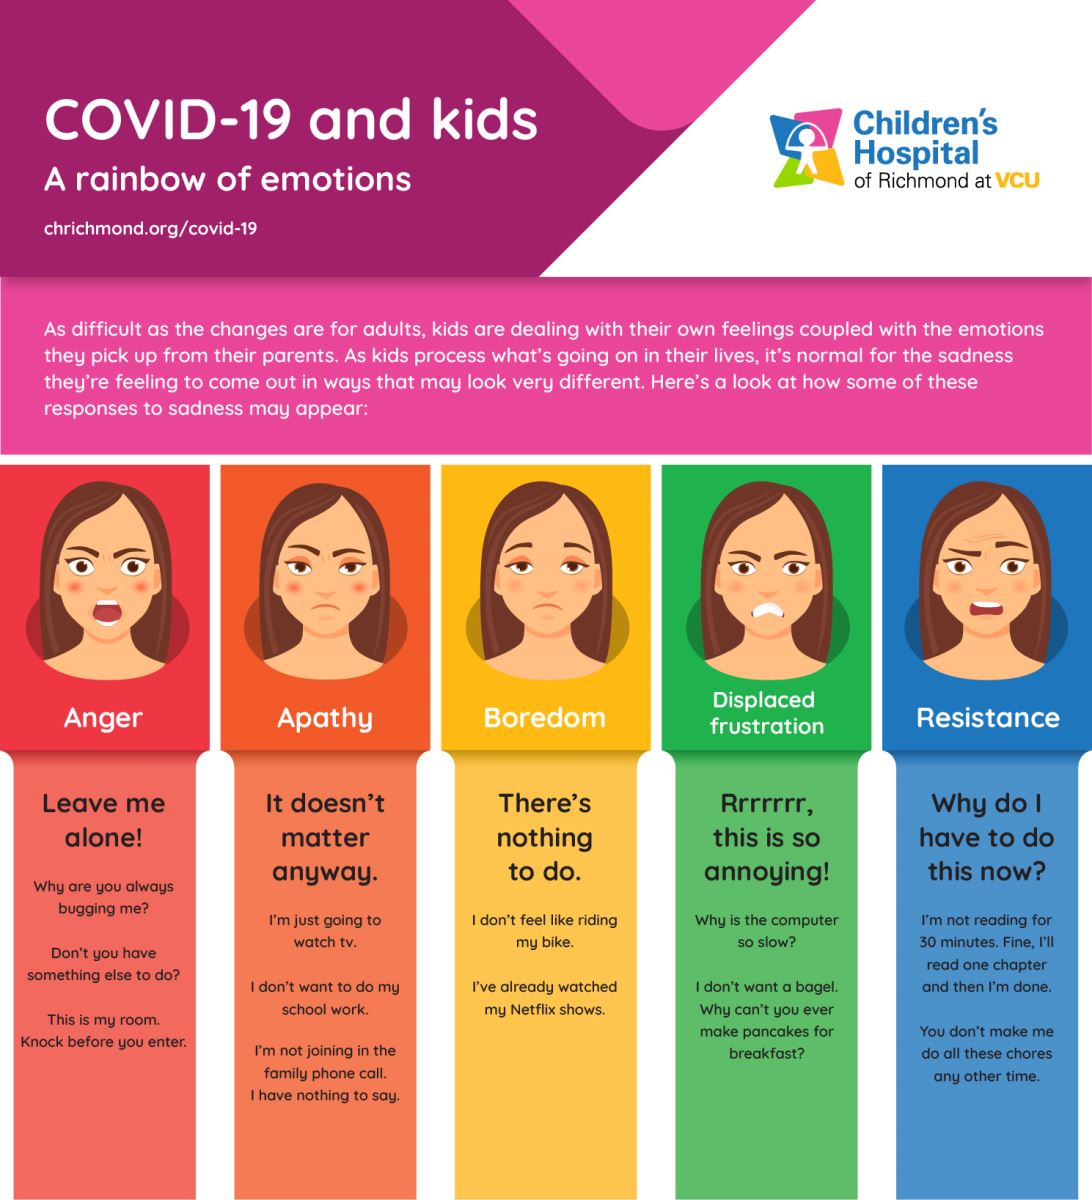 COVID-19 and kids emotional responses